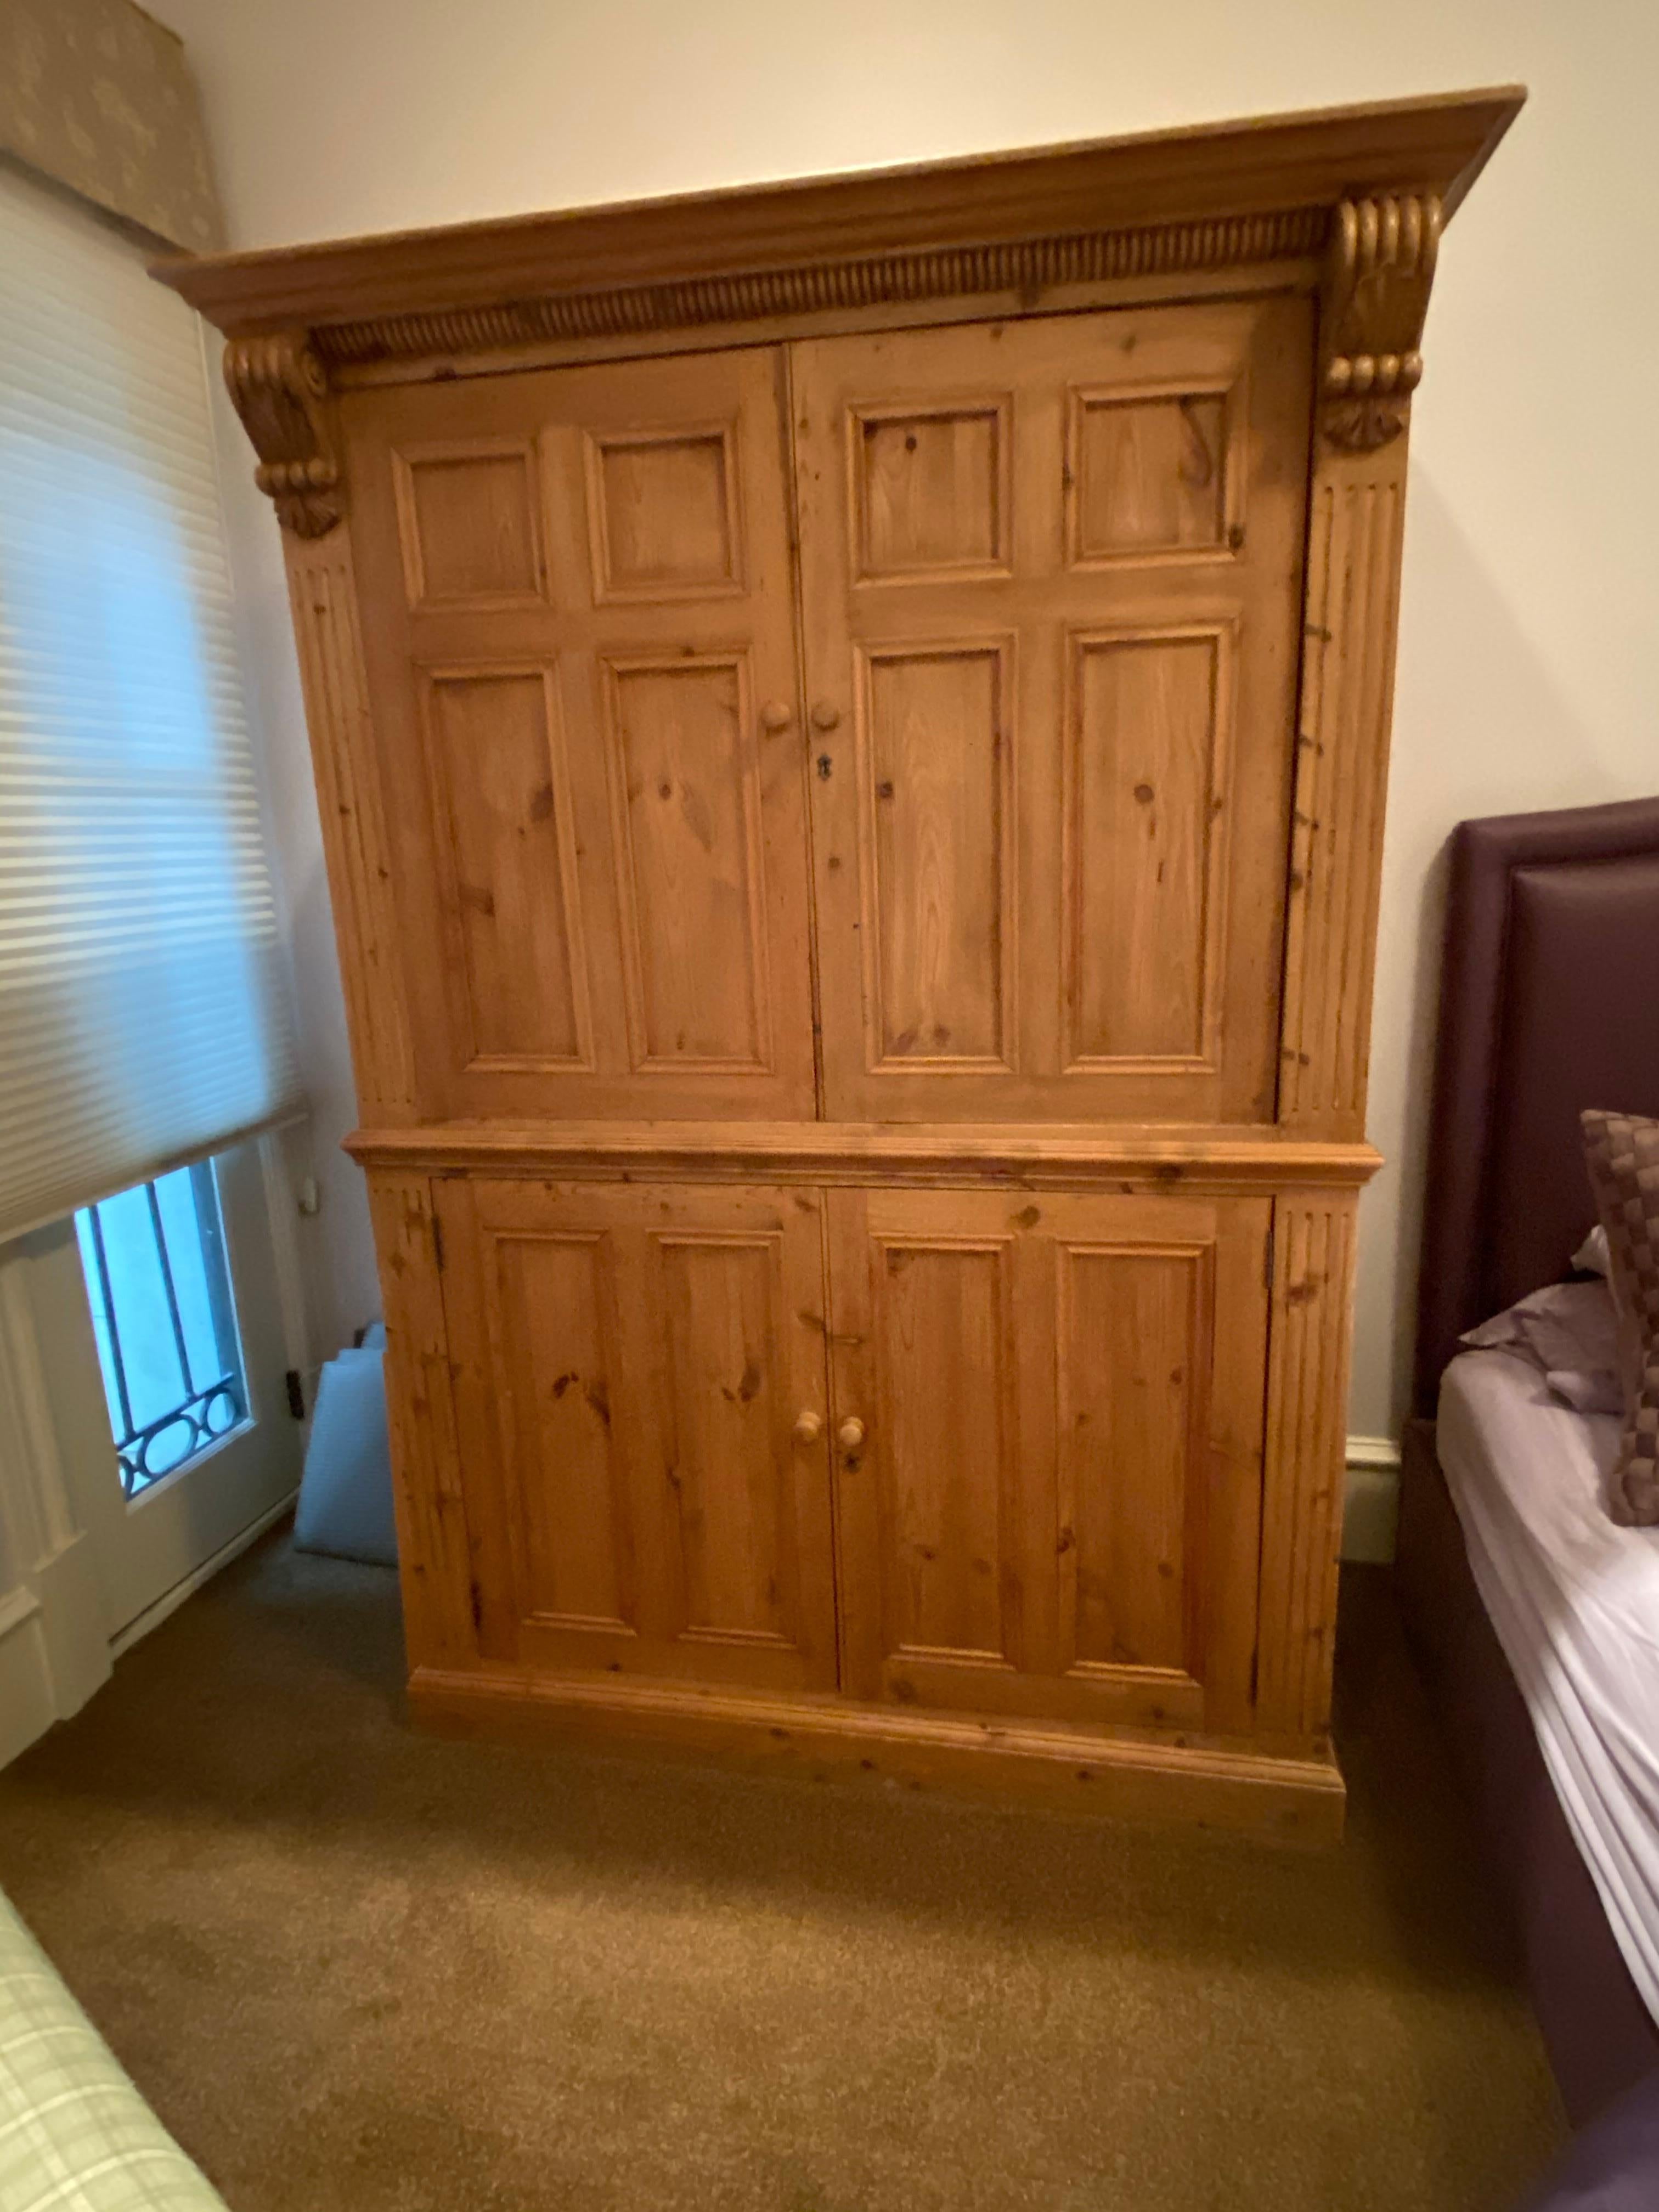 This lovely honey-colored pine armoire from Europe circa 1880, has two doors with recessed panels that are on retractable glides (pocket doors), Comes with working lock & key, with original nickel plates & turned wooden pulls. Provides great storage